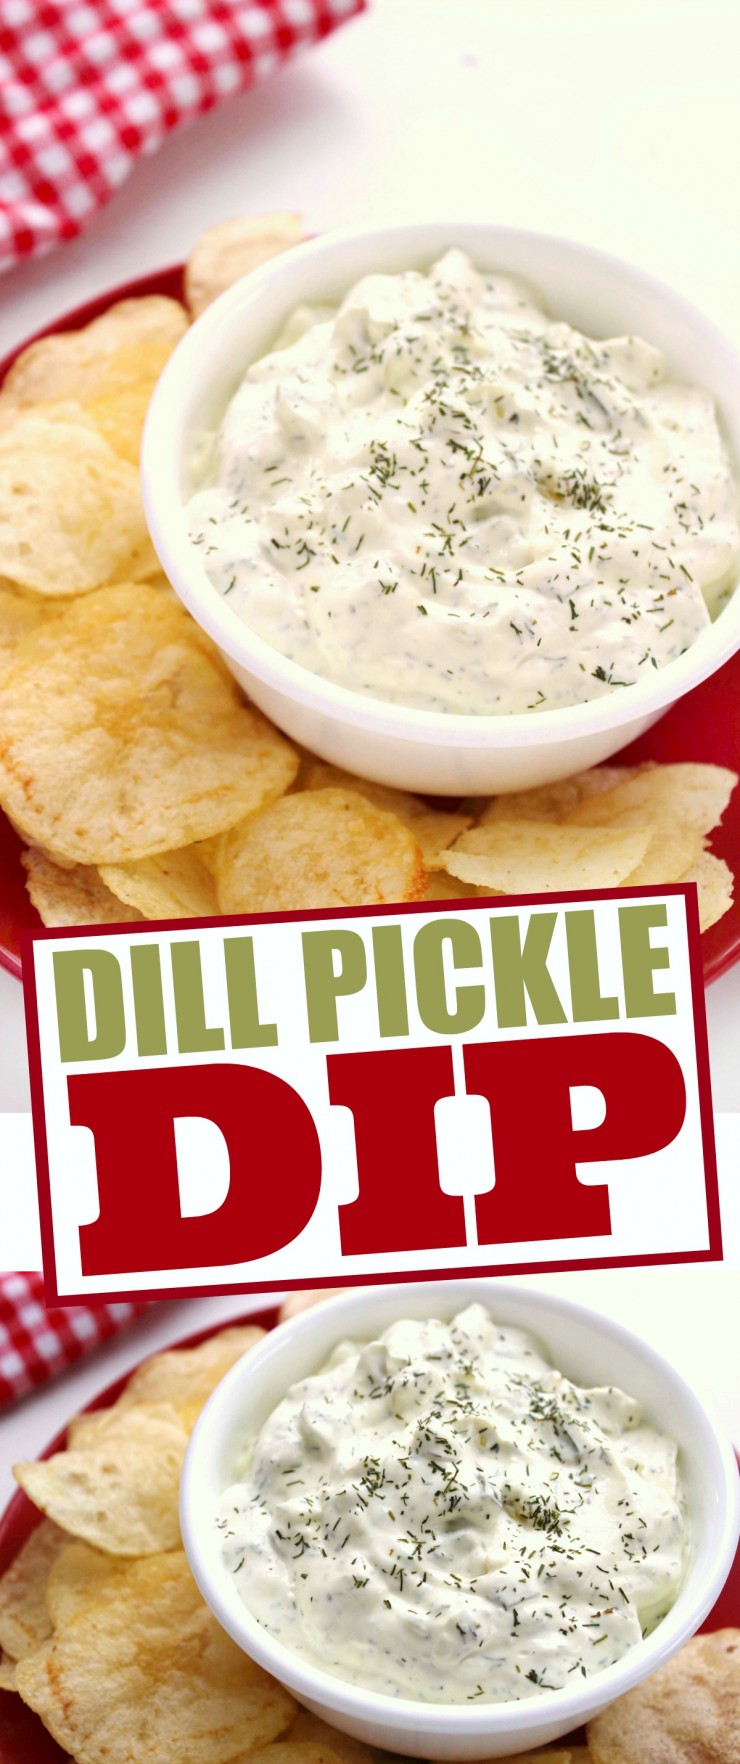 This Dill Pickle Dip is a deliciously delectable dip. It is seriously addictive and full of flavour, sure to be a favourite dip recipe!